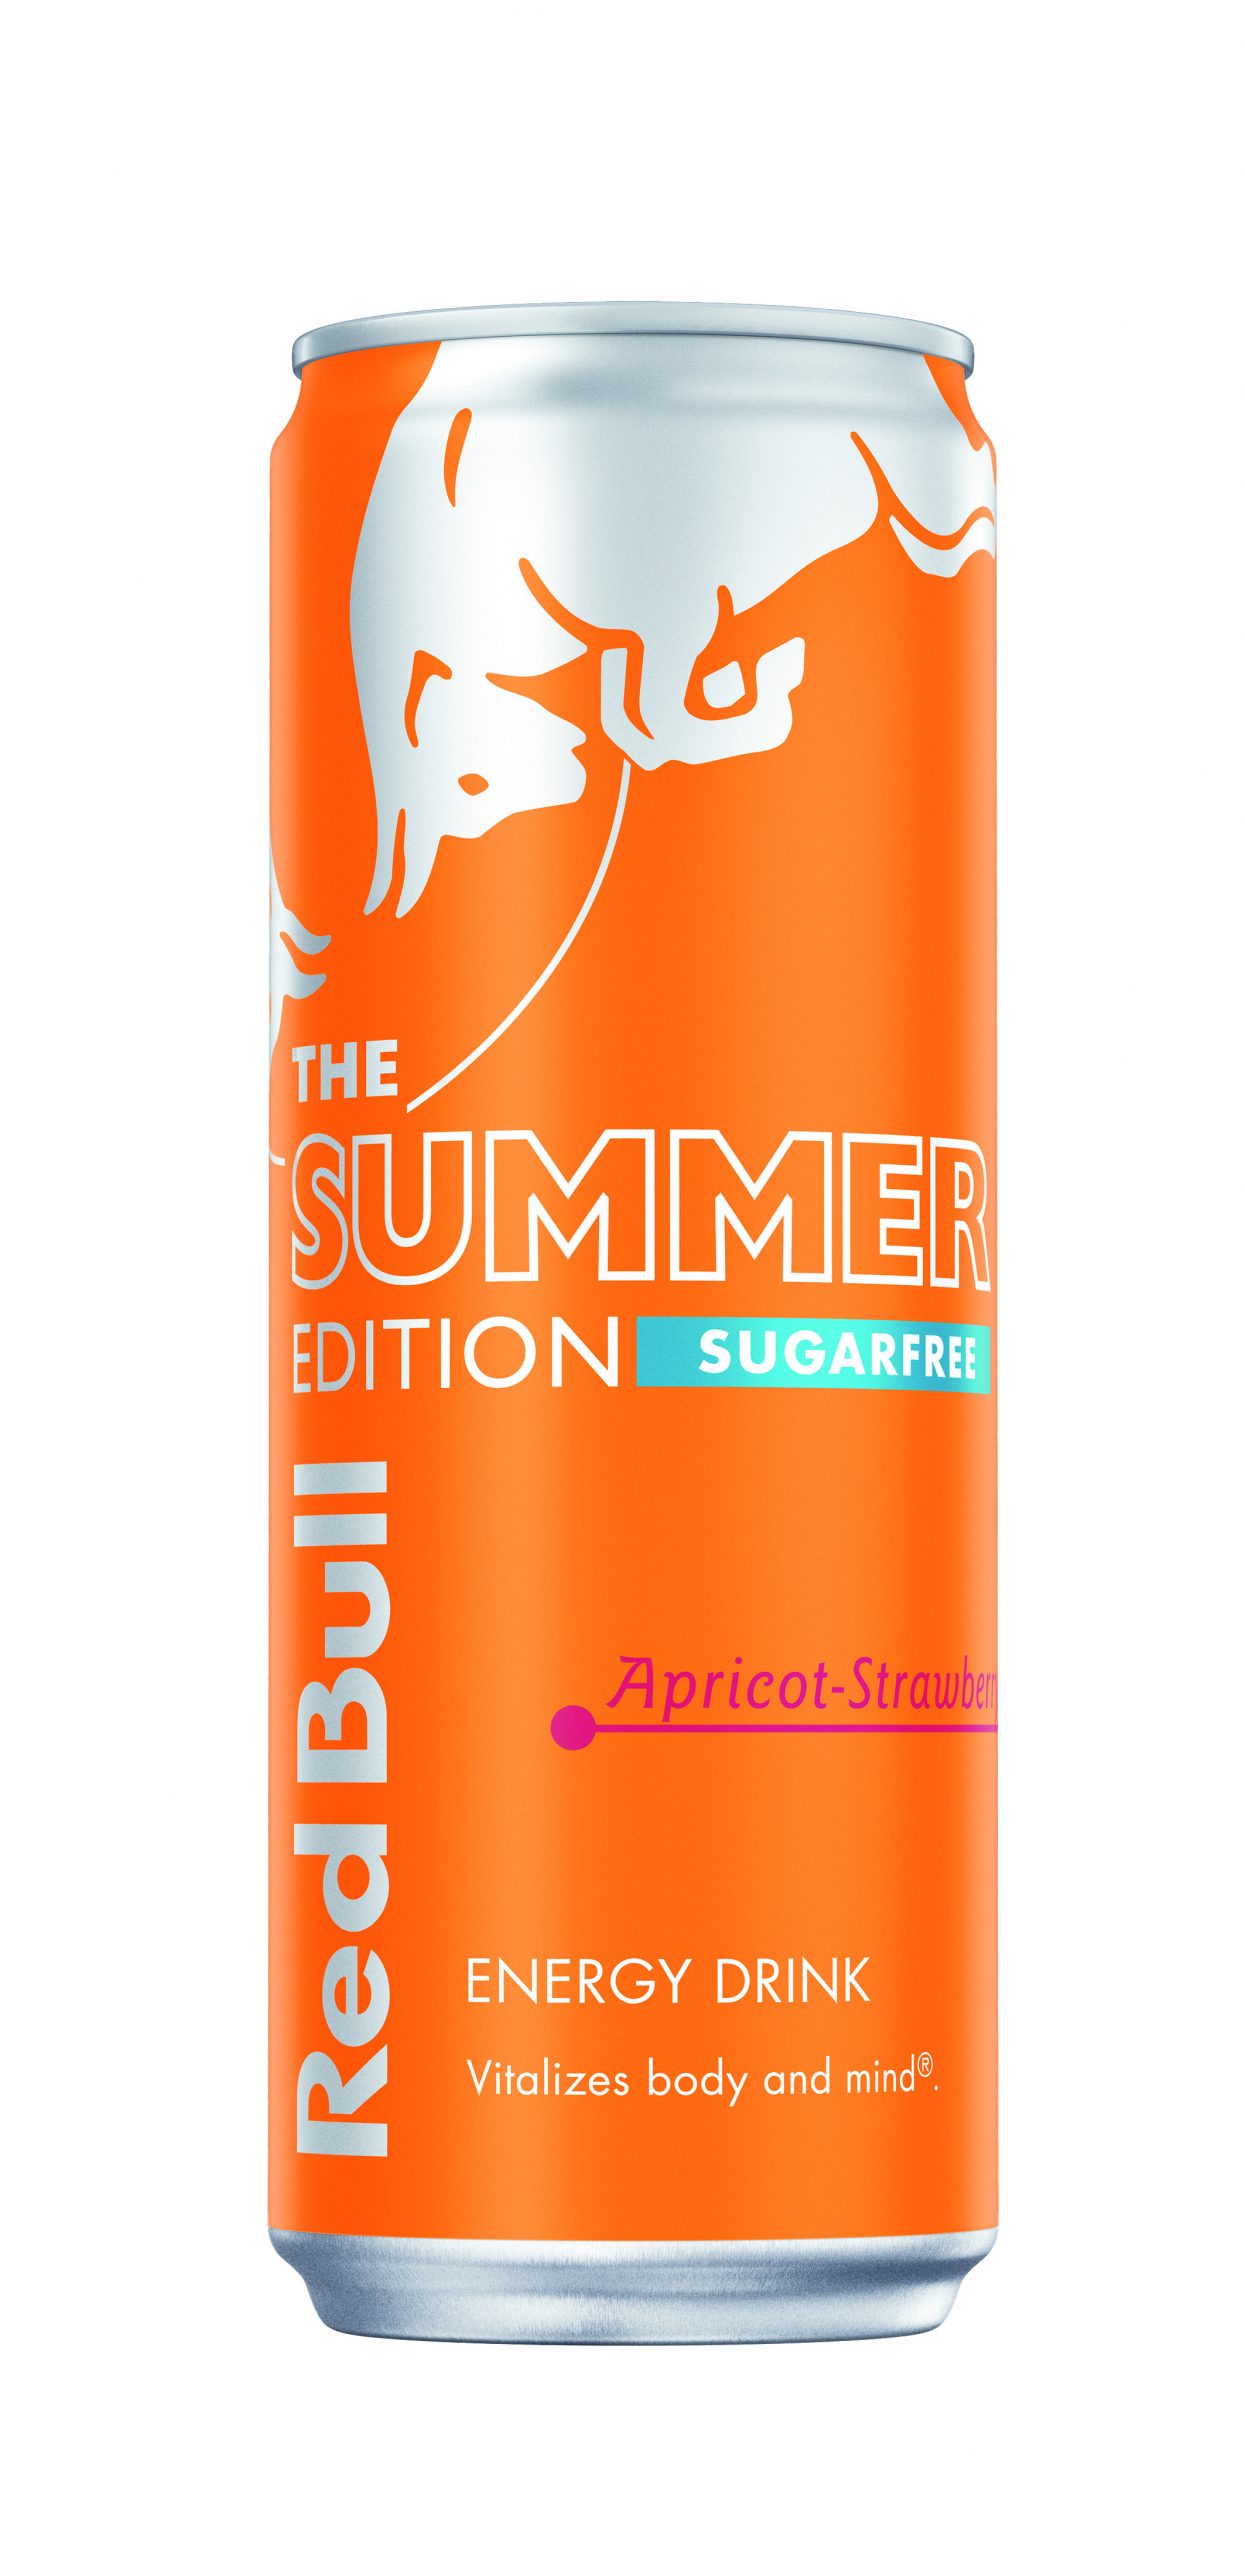 Red Bull announces this year’s Summer Edition: Apricot-Strawberry